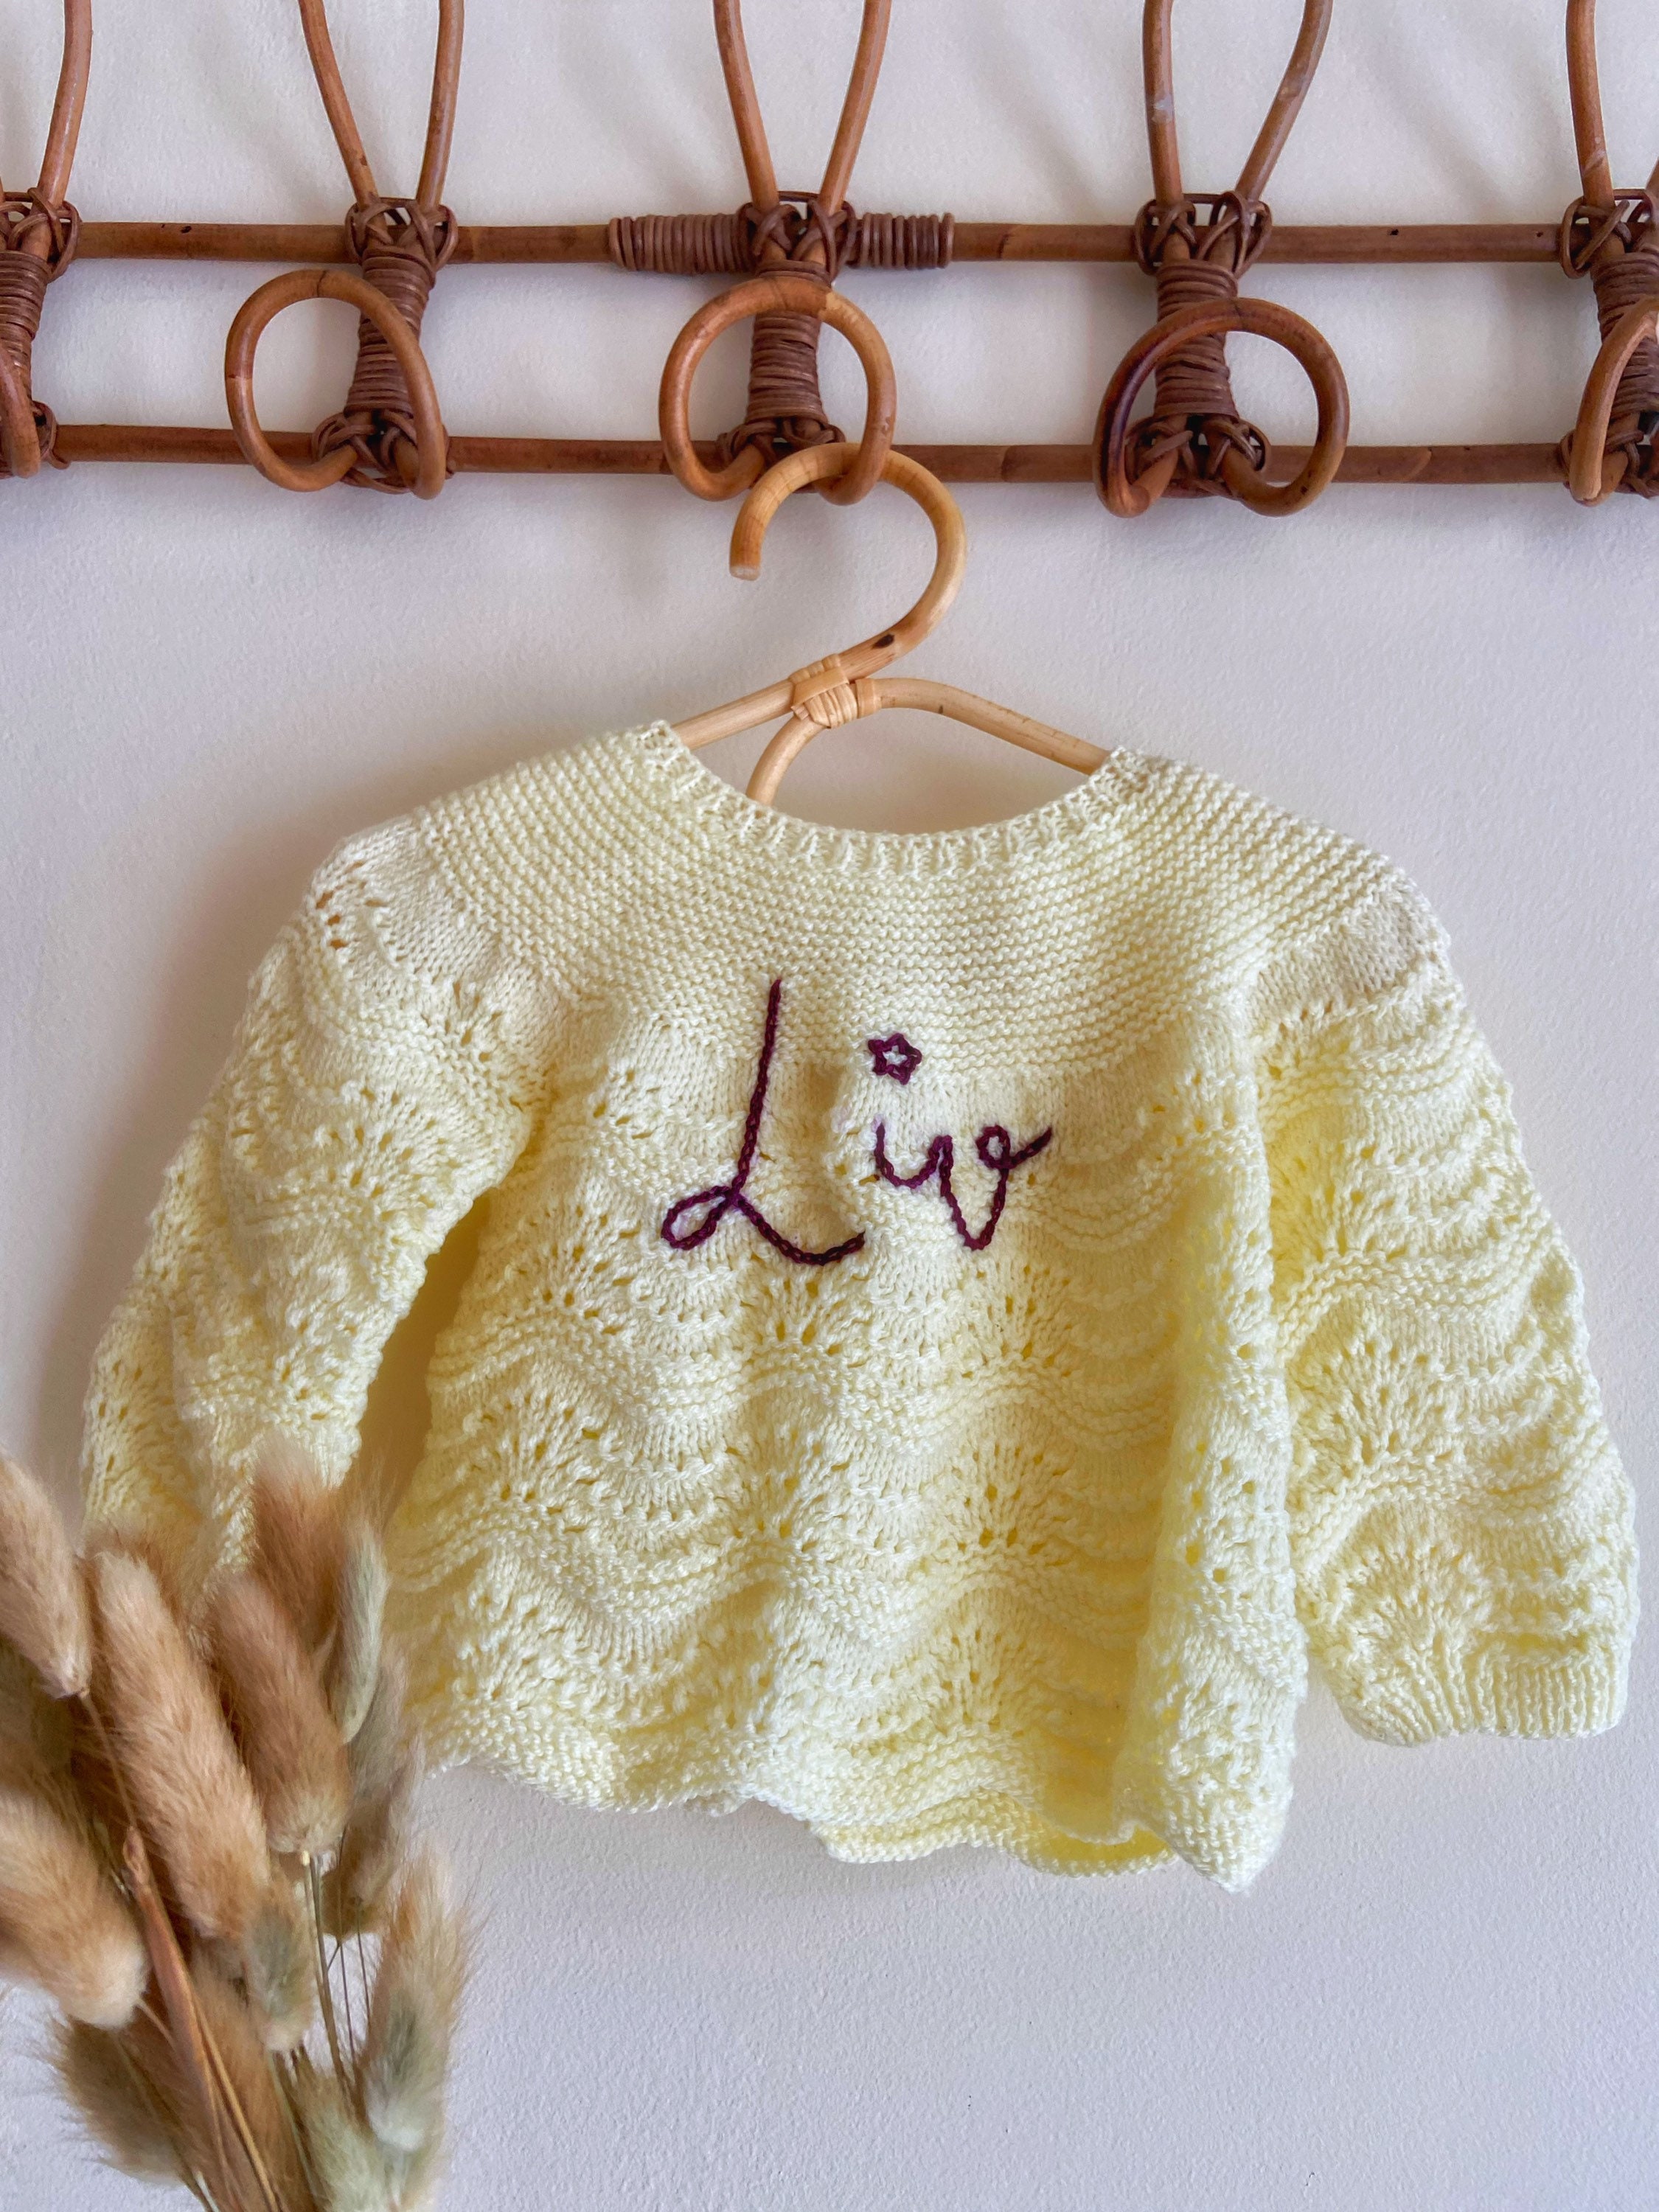 Lime Green Bra for Baby and Custom Hand Embroidery Collection Status: Second Hand #neutralsnow 1-3 months